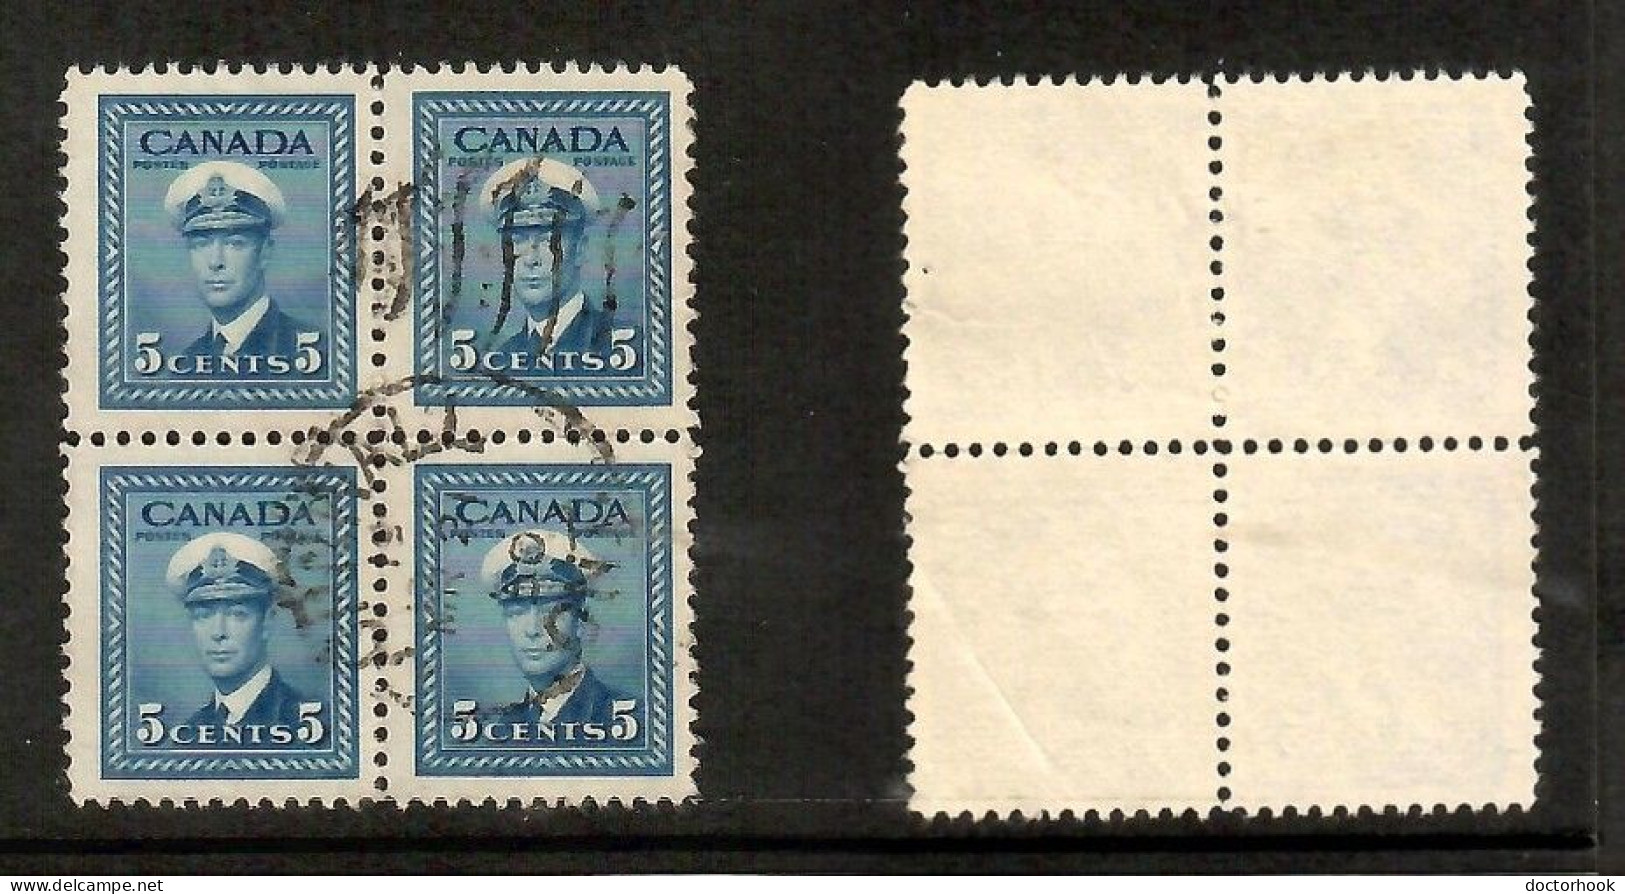 CANADA   Scott # 255 USED BLOCK Of 4 (CONDITION AS PER SCAN) (CAN-210) - Blocks & Sheetlets